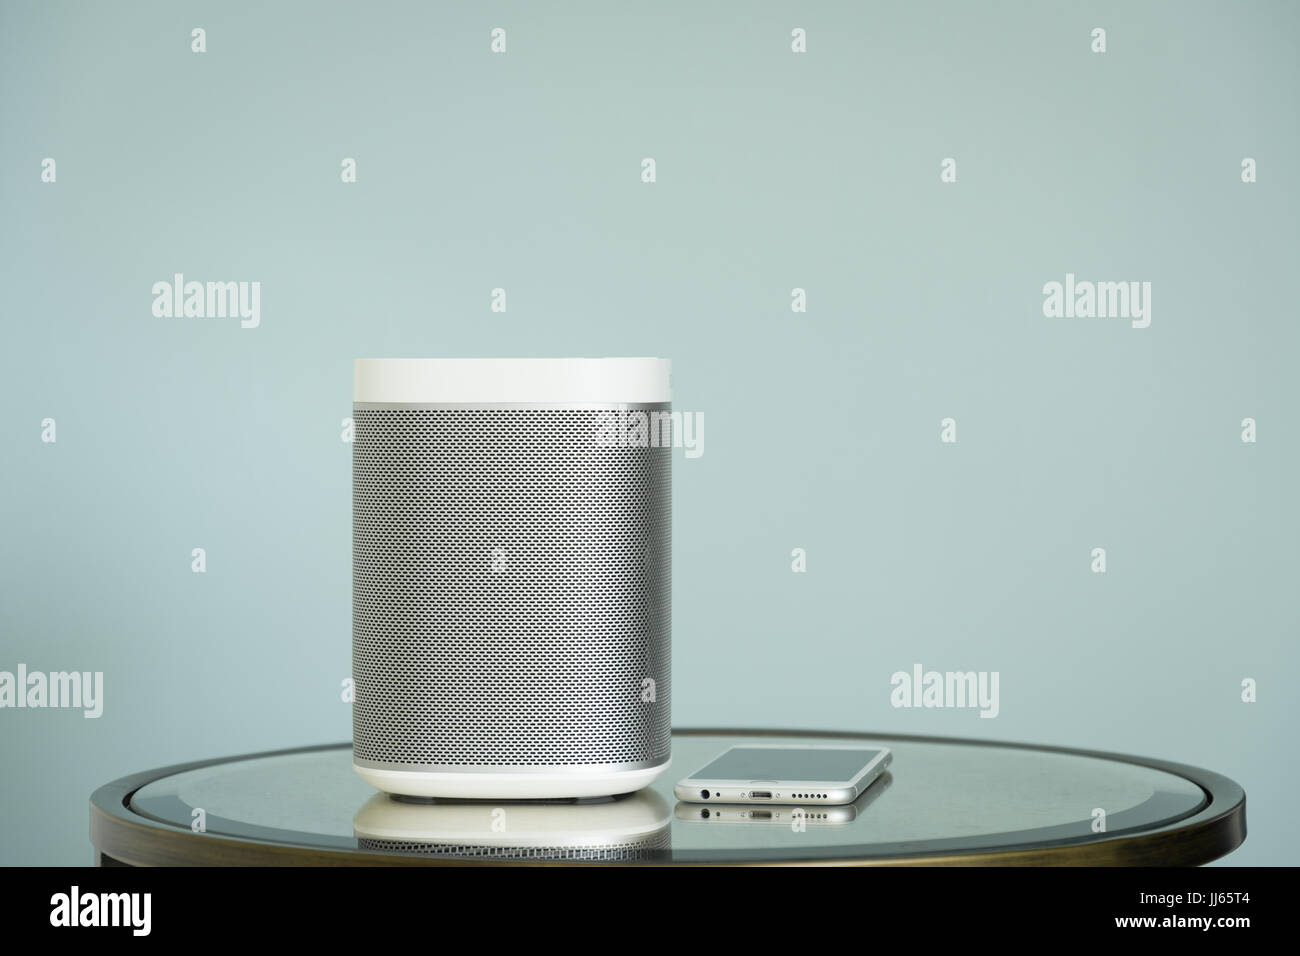 Wireless speaker on a mirrored table and a mobile phone against a light blue background. Stock Photo